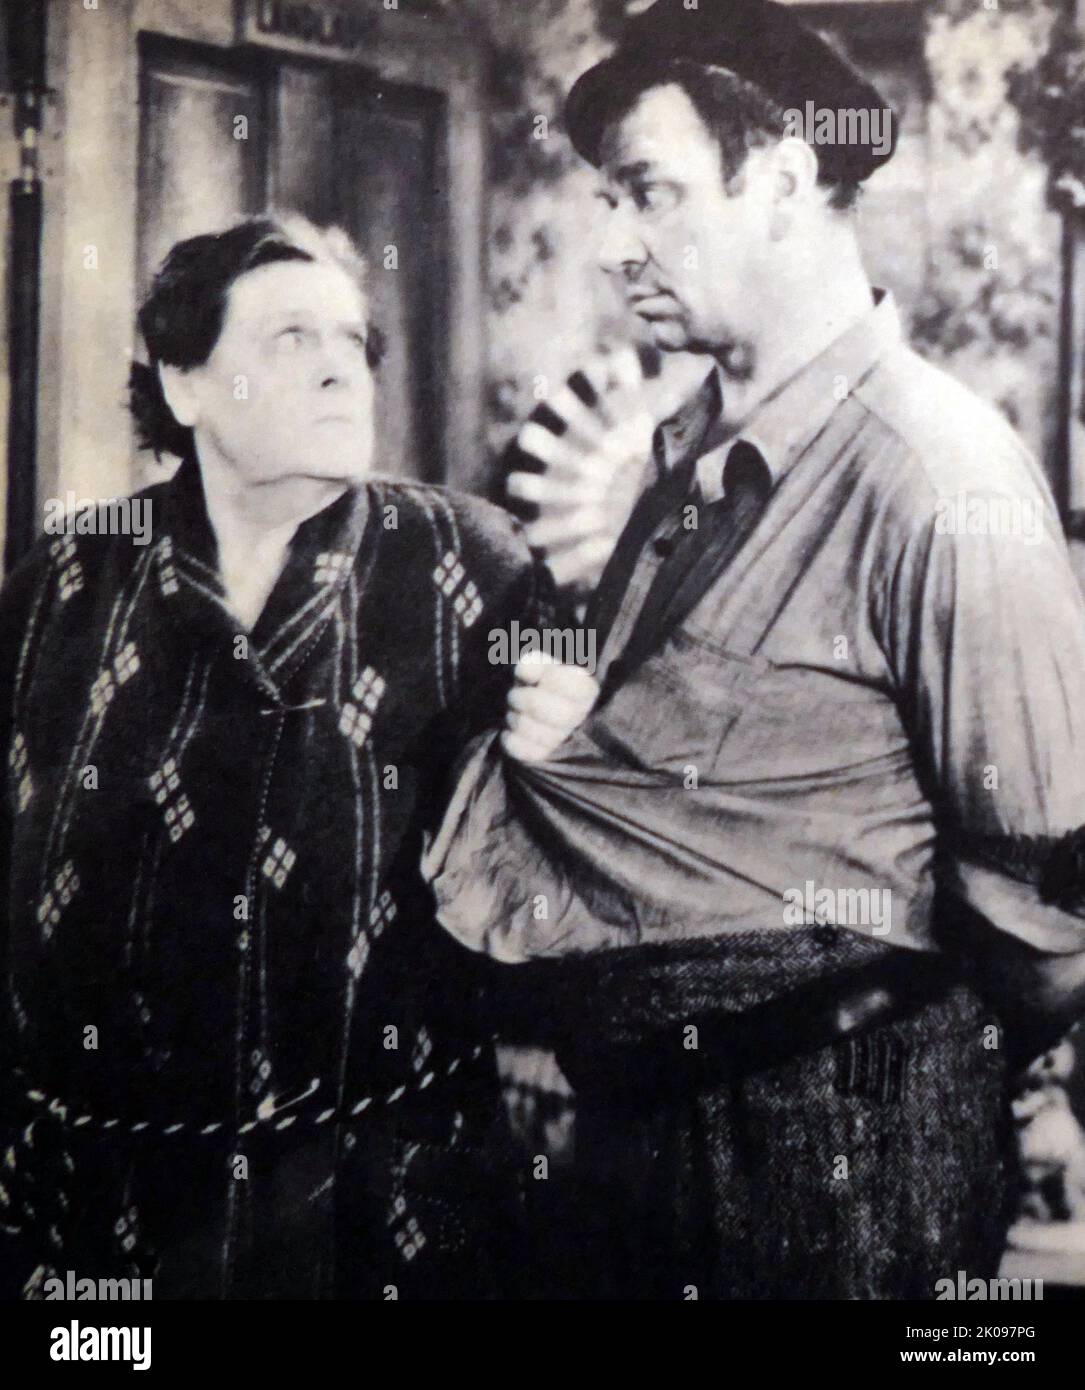 Marie Dressler and Wallace Beery in Min and Bill is a 1930 American Pre-Code comedy-drama film. Marie Dressler (born Leila Marie Koerber, November 9, 1868 - July 28, 1934) was a Canadian stage and screen actress, comedian, and early silent film and Depression-era film star. In 1914, she was in the first full-length film comedy. She won the Academy Award for Best Actress in 1931. Wallace Fitzgerald Beery (April 1, 1885 - April 15, 1949) was an American film and stage actor. Beery appeared in some 250 films during a 36-year career. Stock Photo